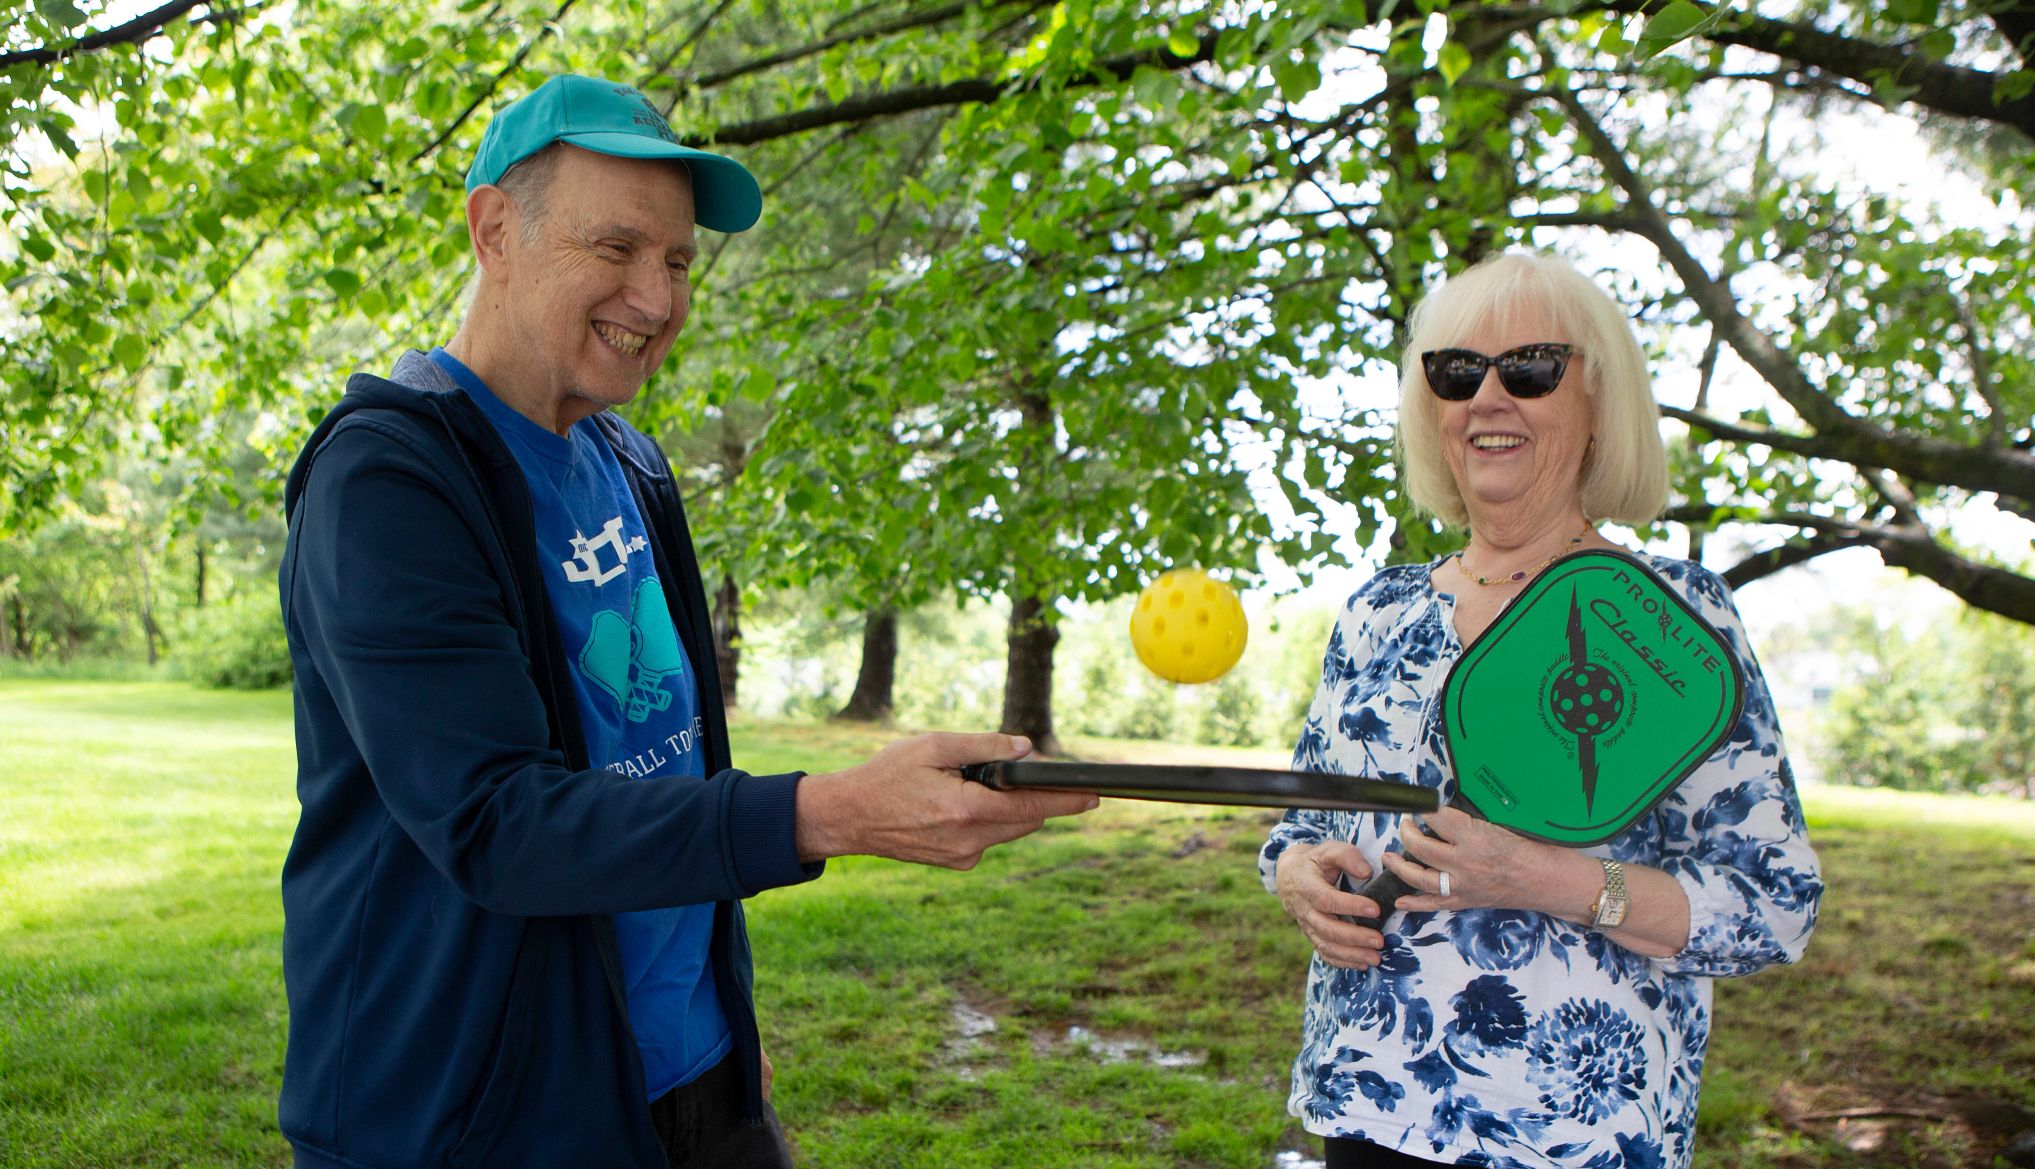 abe rosenstein bounces a yellow ball off his pickleball racquet. next to him, his wife judy smiles while holding a green and black pickleball racquet.